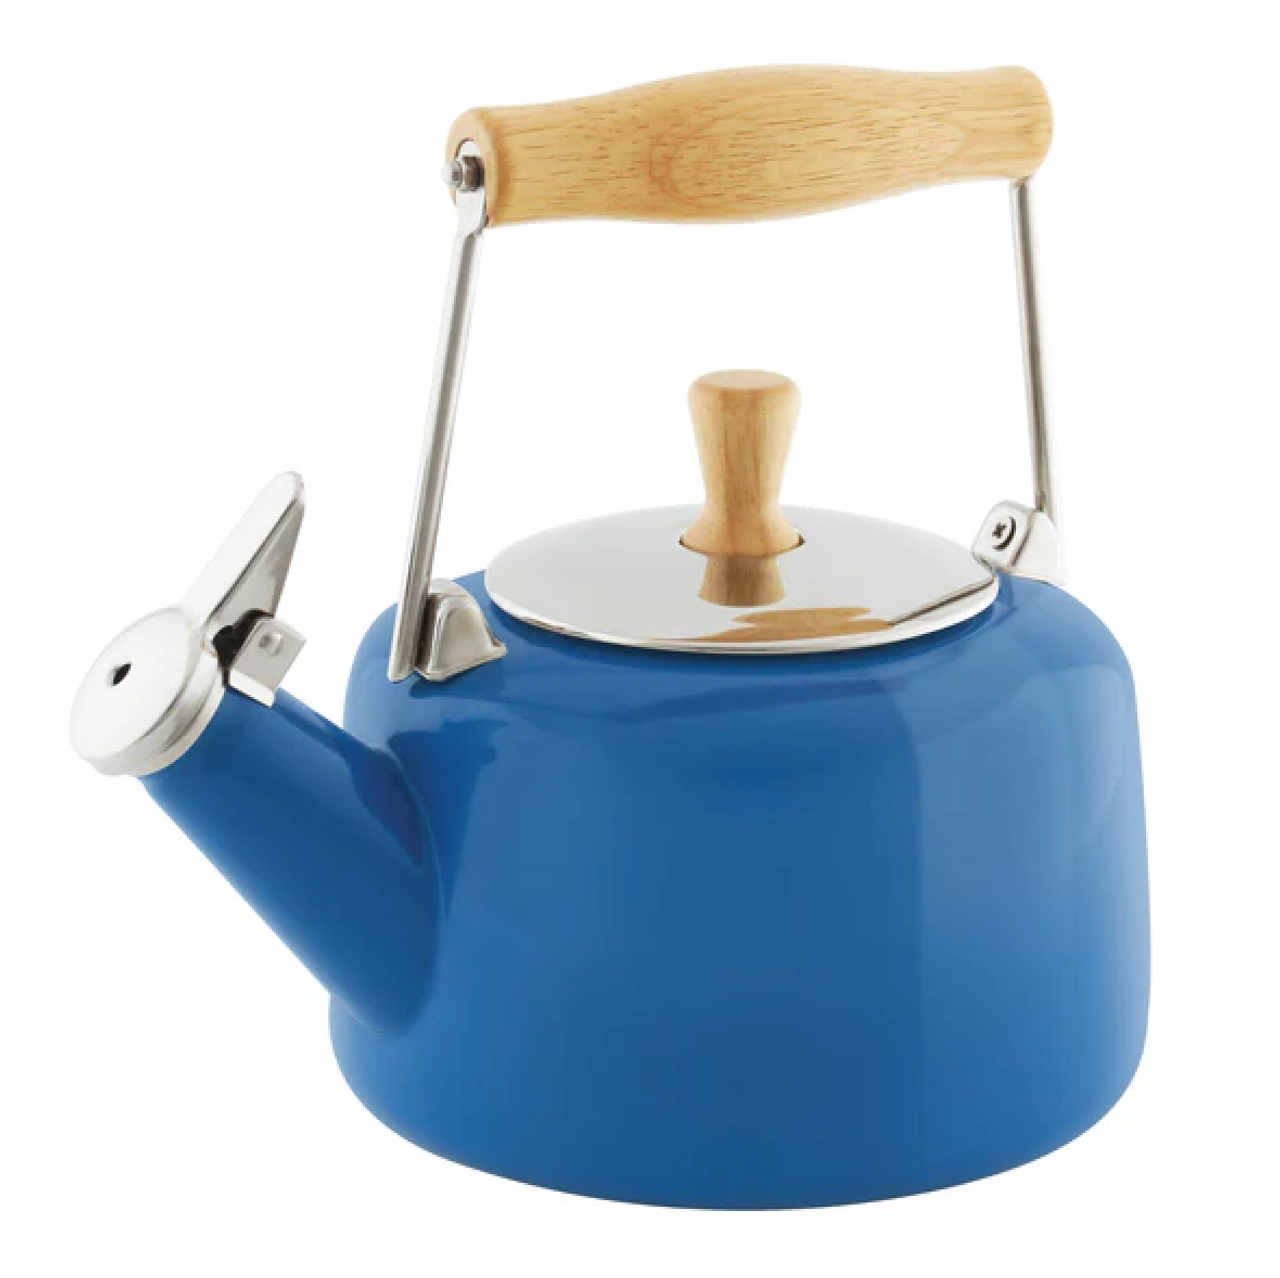 https://cdn11.bigcommerce.com/s-5dm6yytbhp/images/stencil/1280x1280/products/1009/2485/Sven_Tea_Kettle-Blue_Coral__13915.1702057496.png?c=2